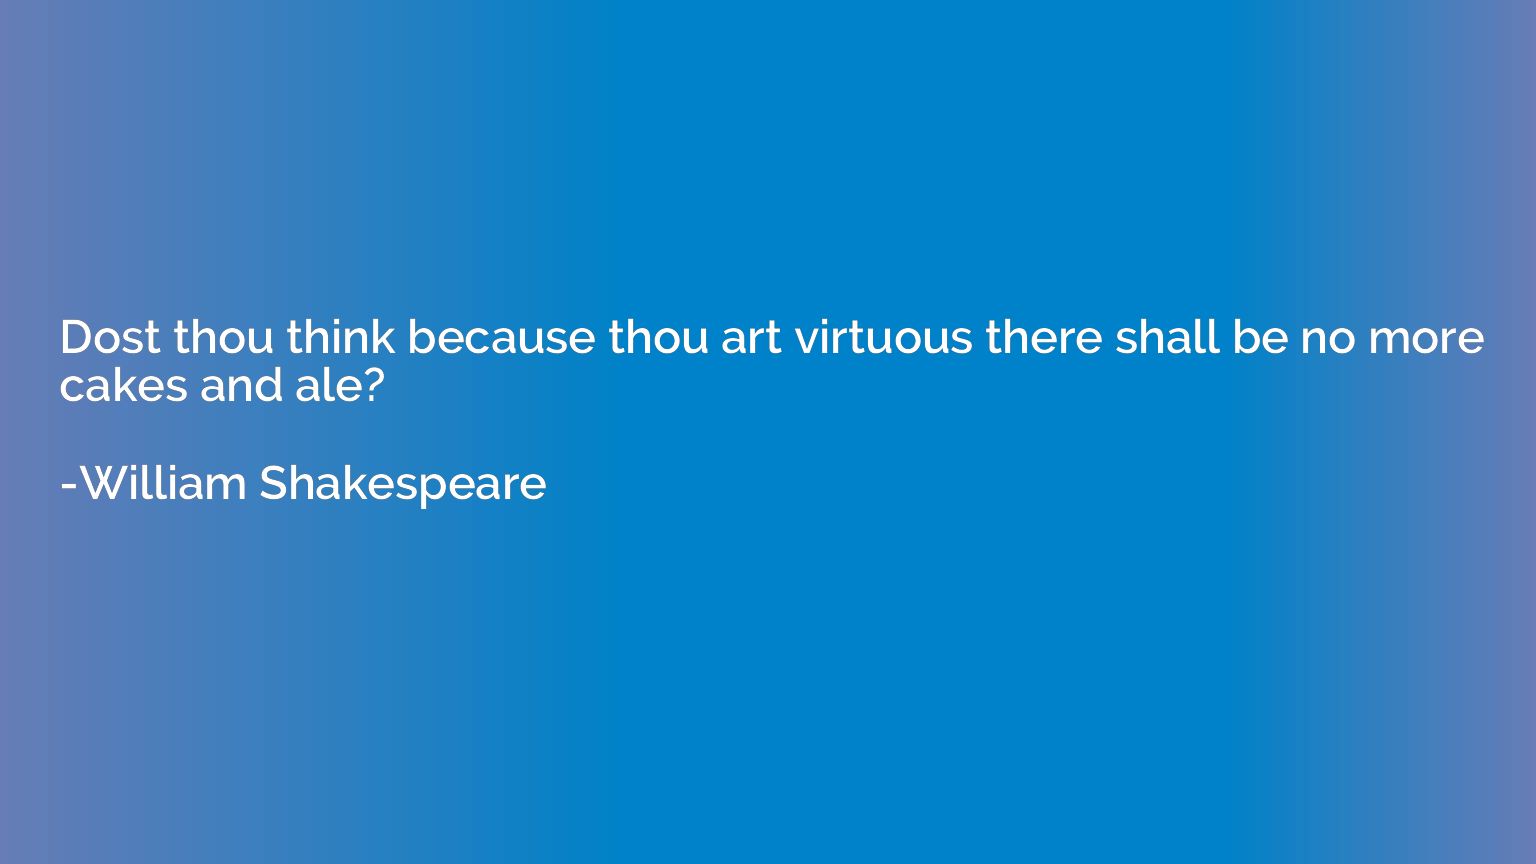 Dost thou think because thou art virtuous there shall be no 